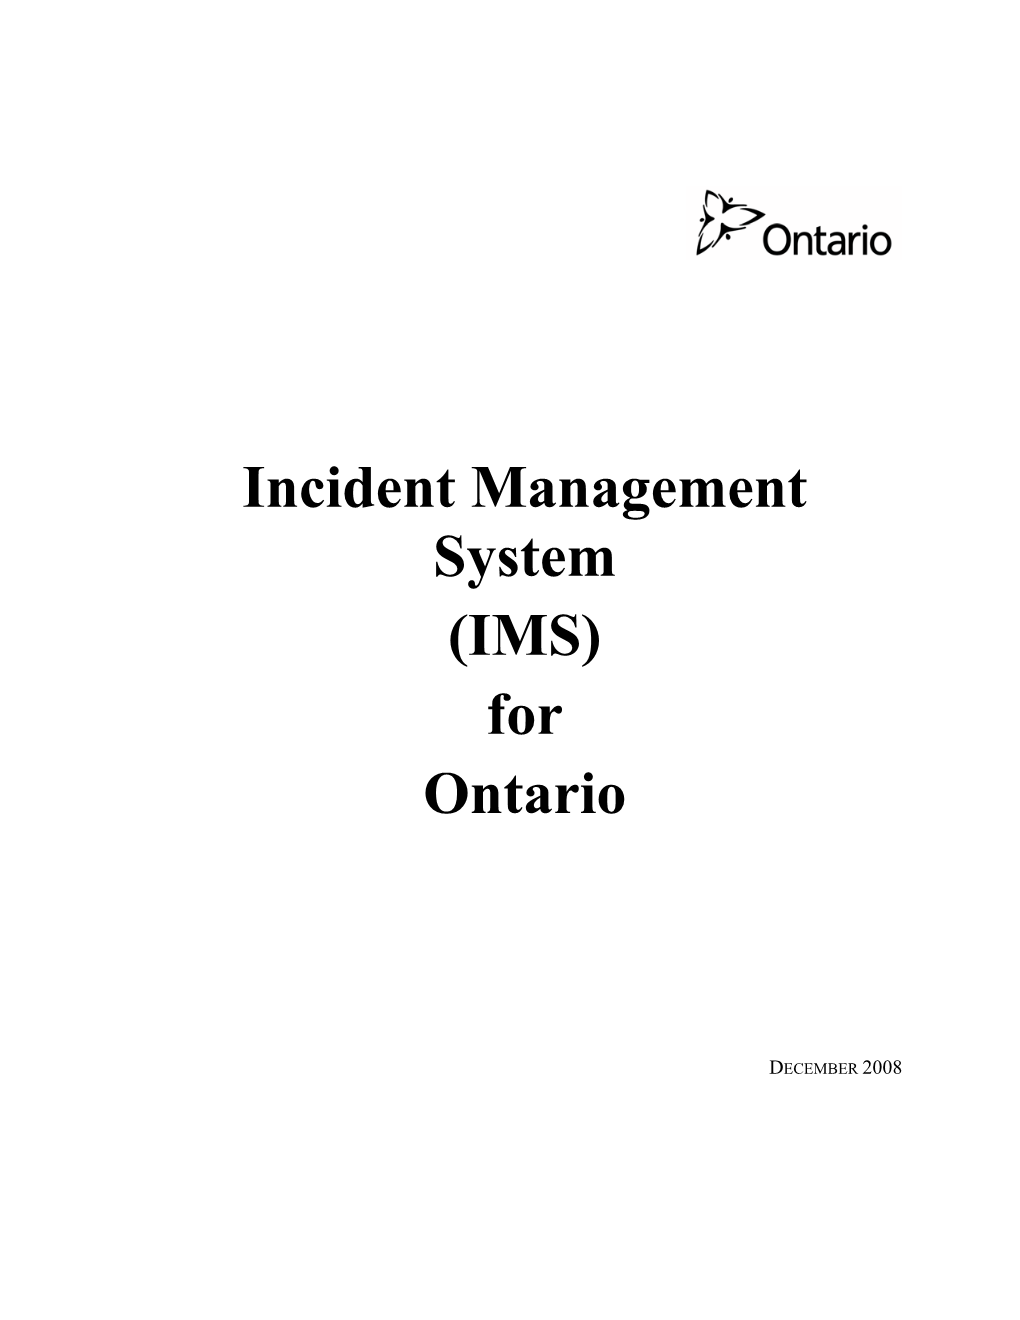 Incident Management System (IMS) for Ontario